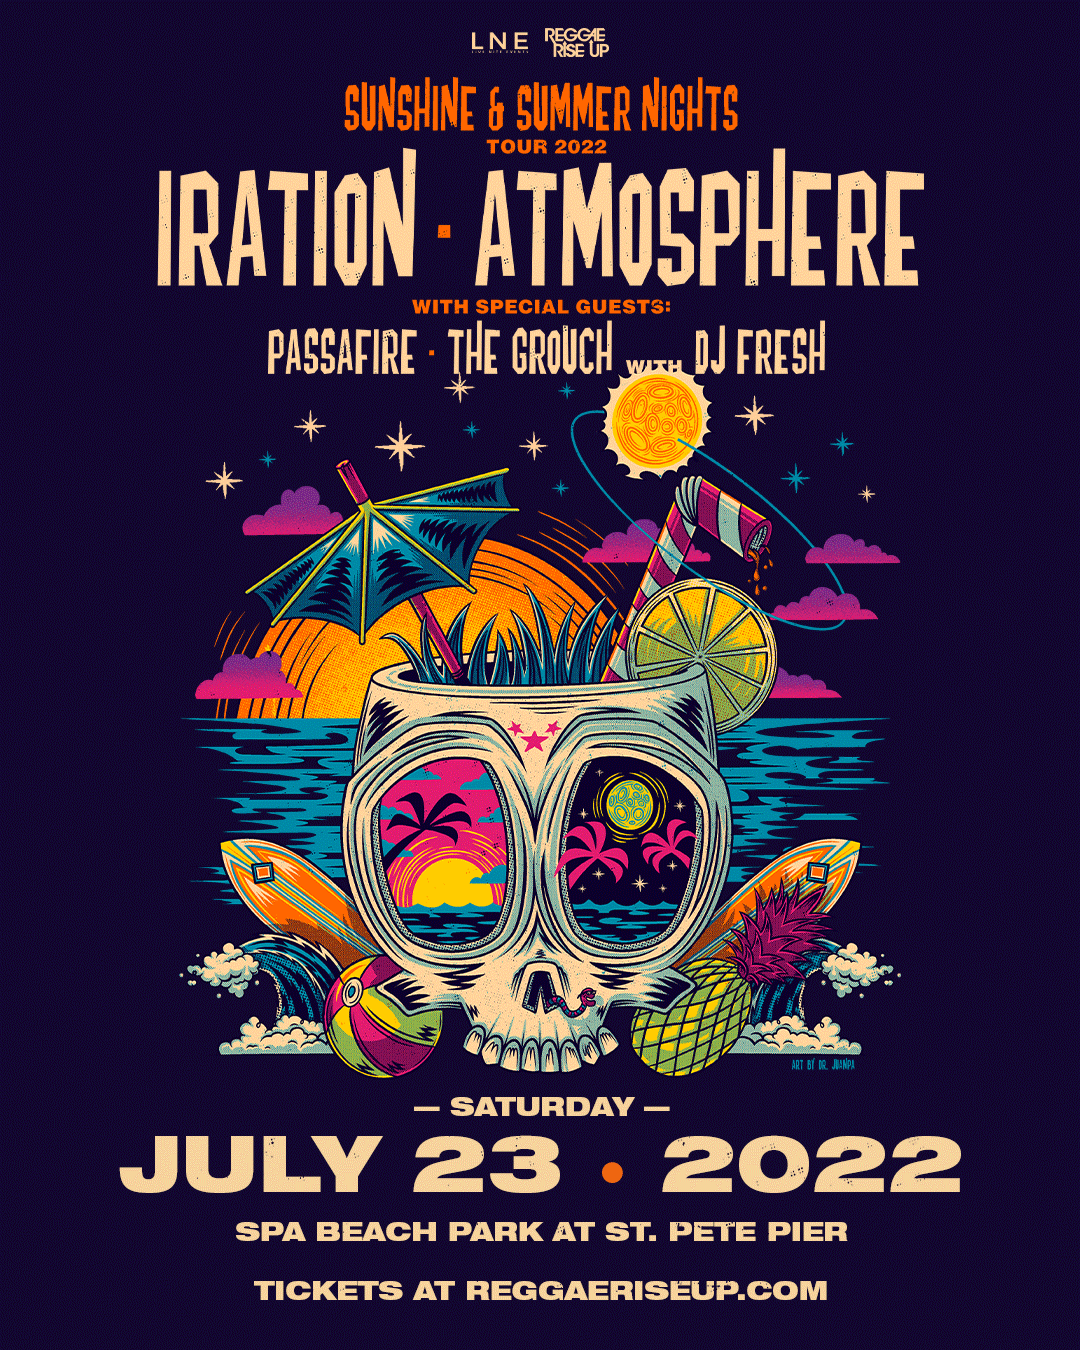 IRATION & ATMOSPHERE at Spa Beach Park Tickets at Spa Beach Park at St